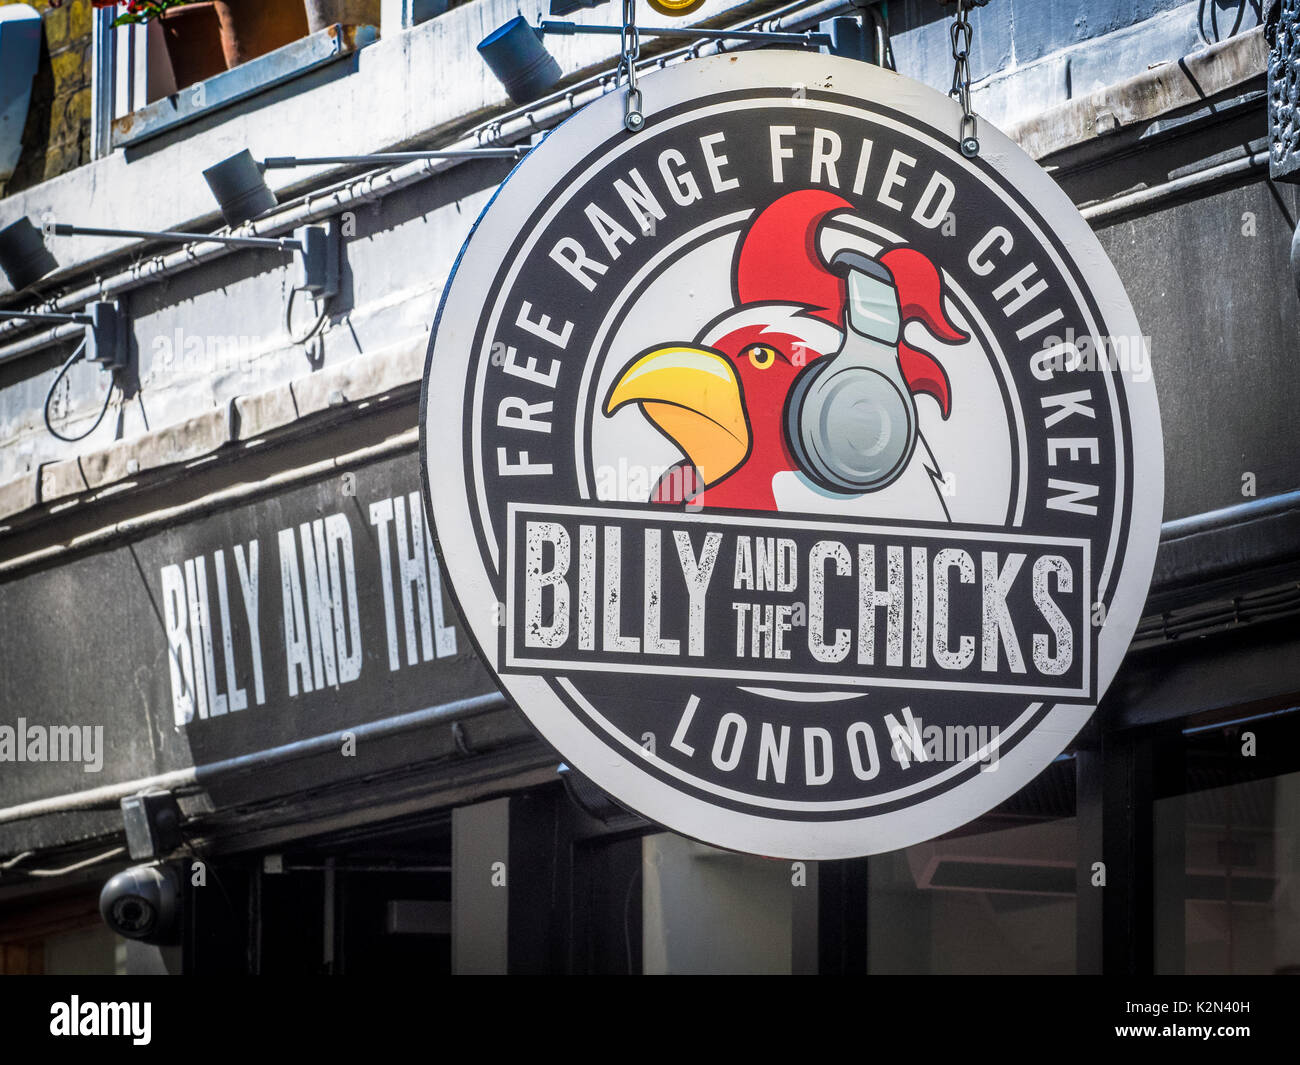 Billy and the Chicks fried chicken restaurant in St Anne's Court Soho, central London Stock Photo